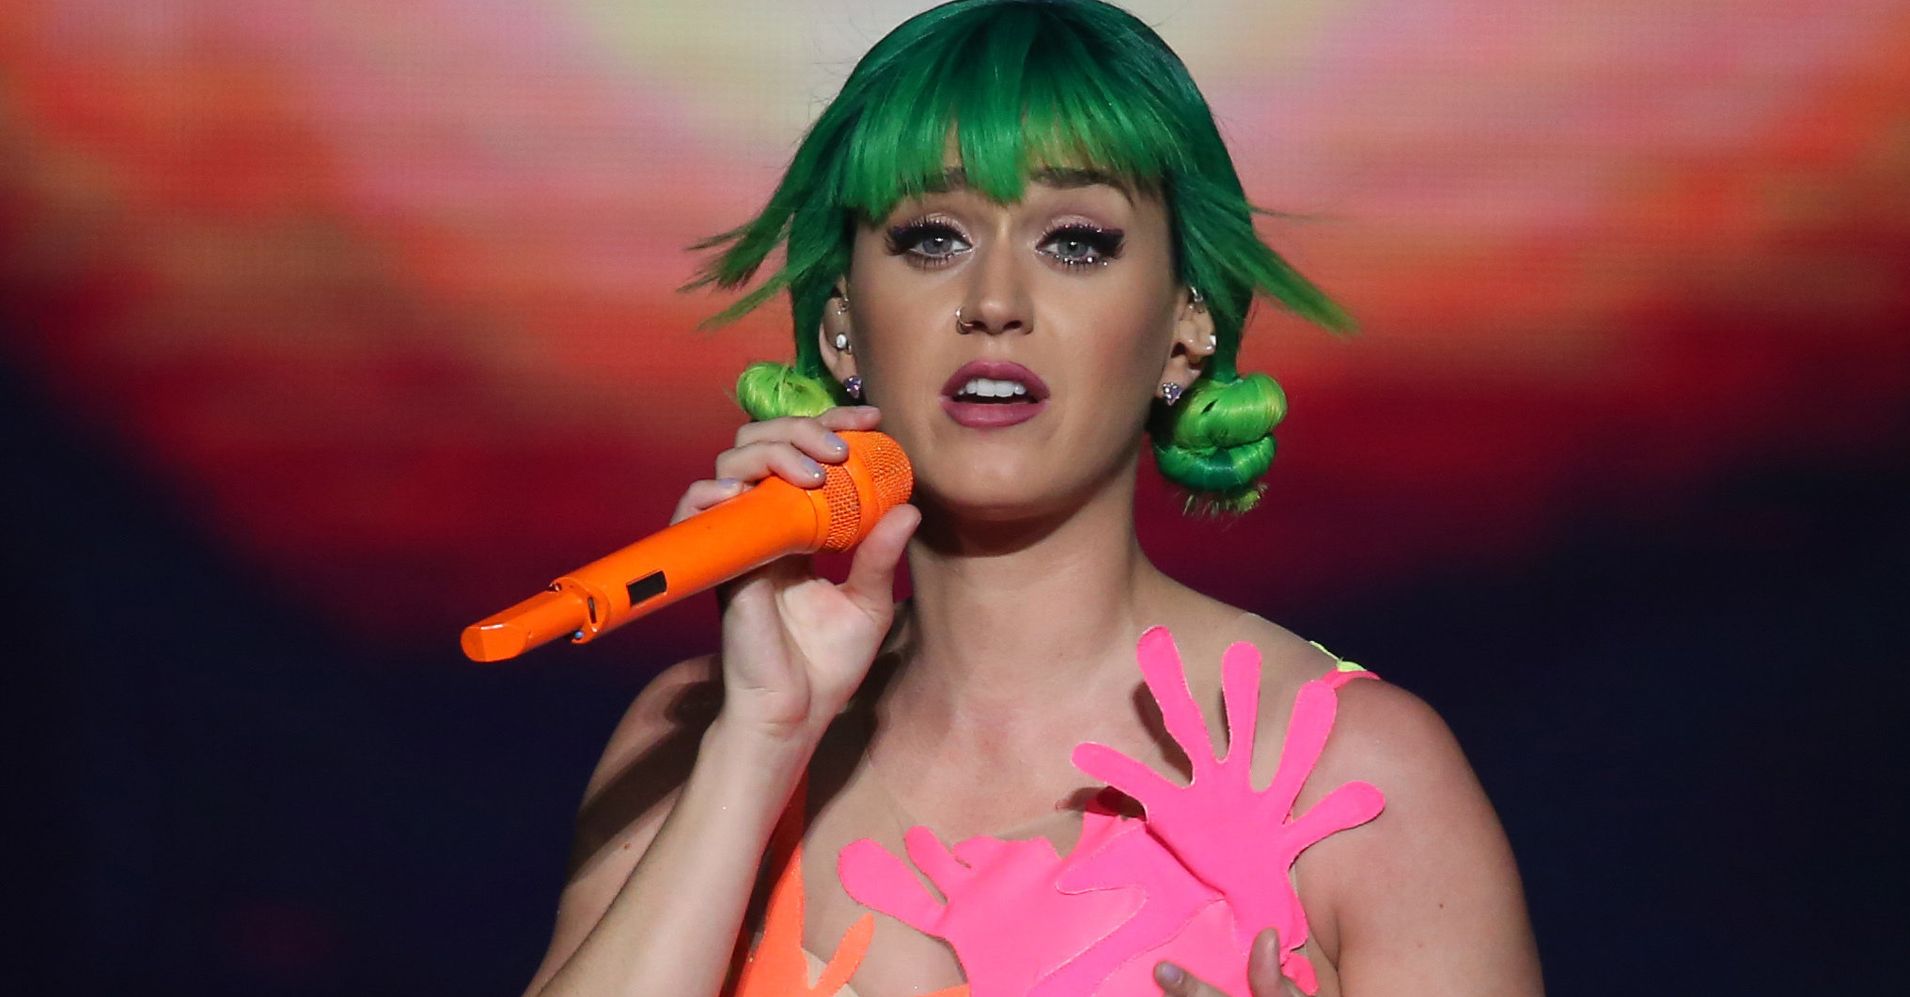 Halloween Costume Ideas Inspired By The Whimsical World Of Katy Perry